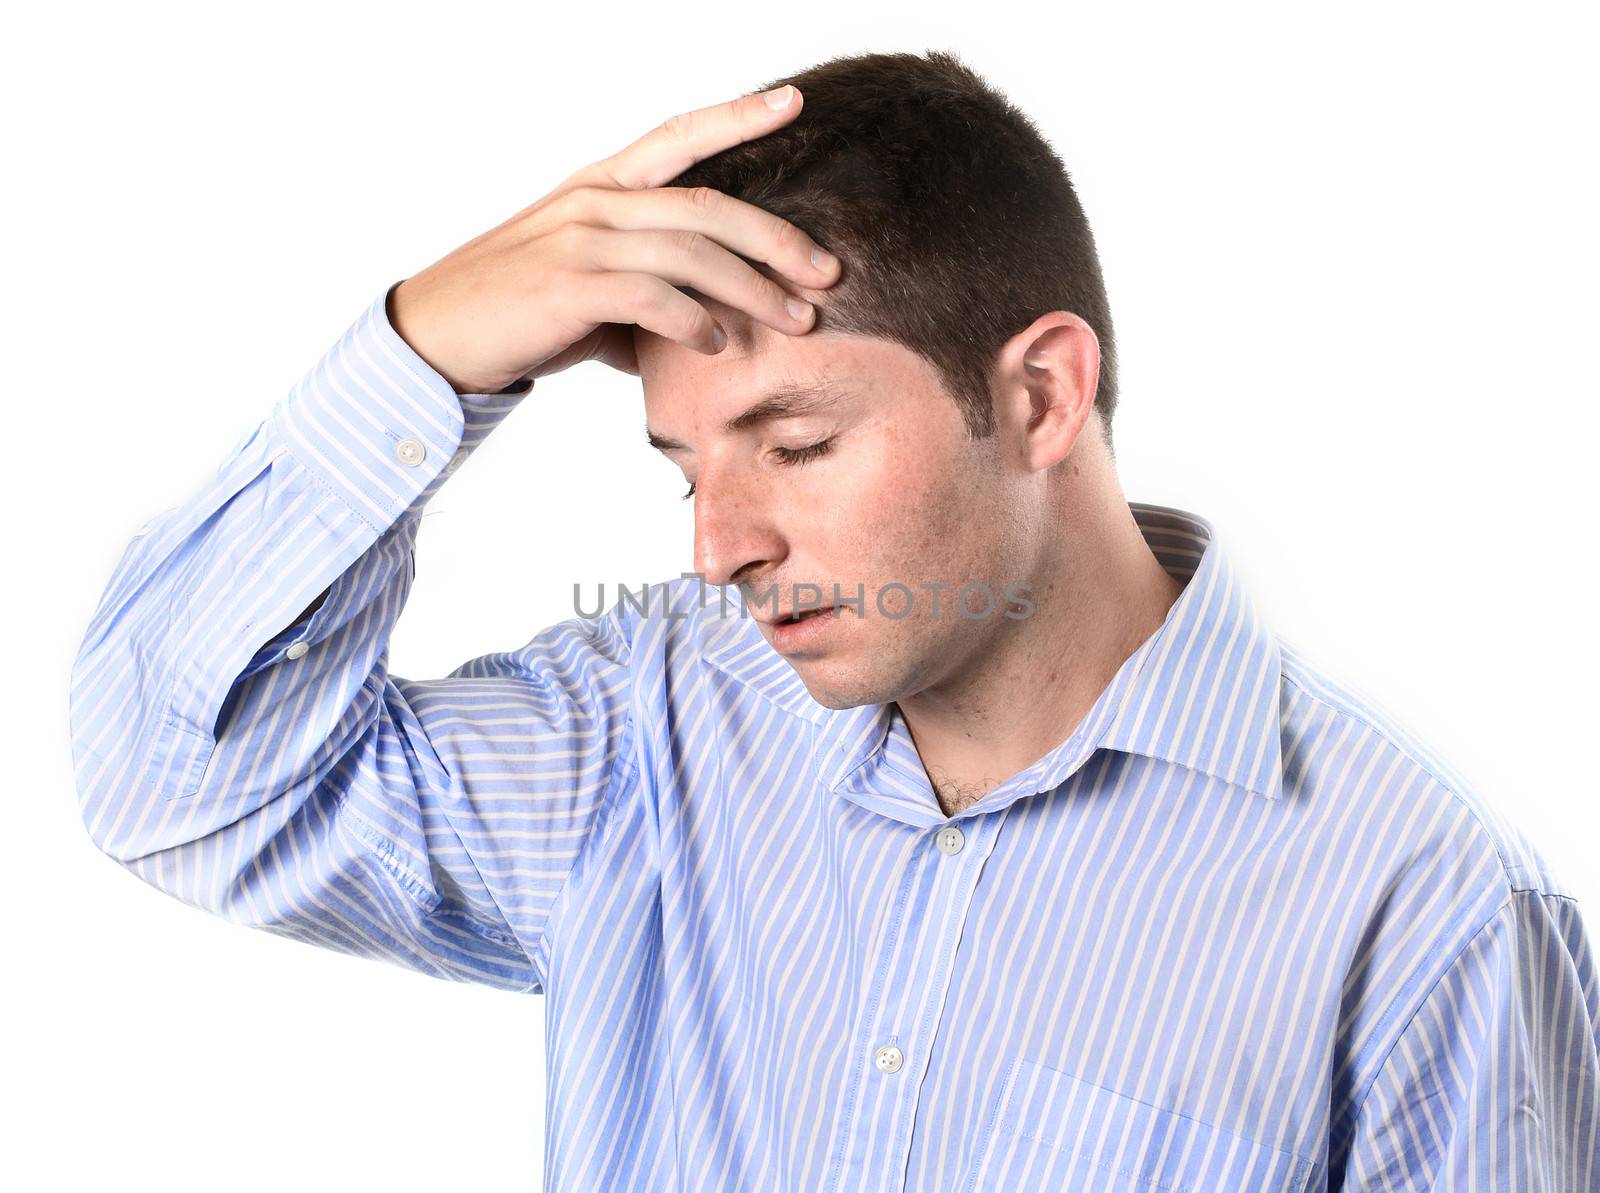 businessman wearing a blue business shirt is over worked and with a headache on a white background